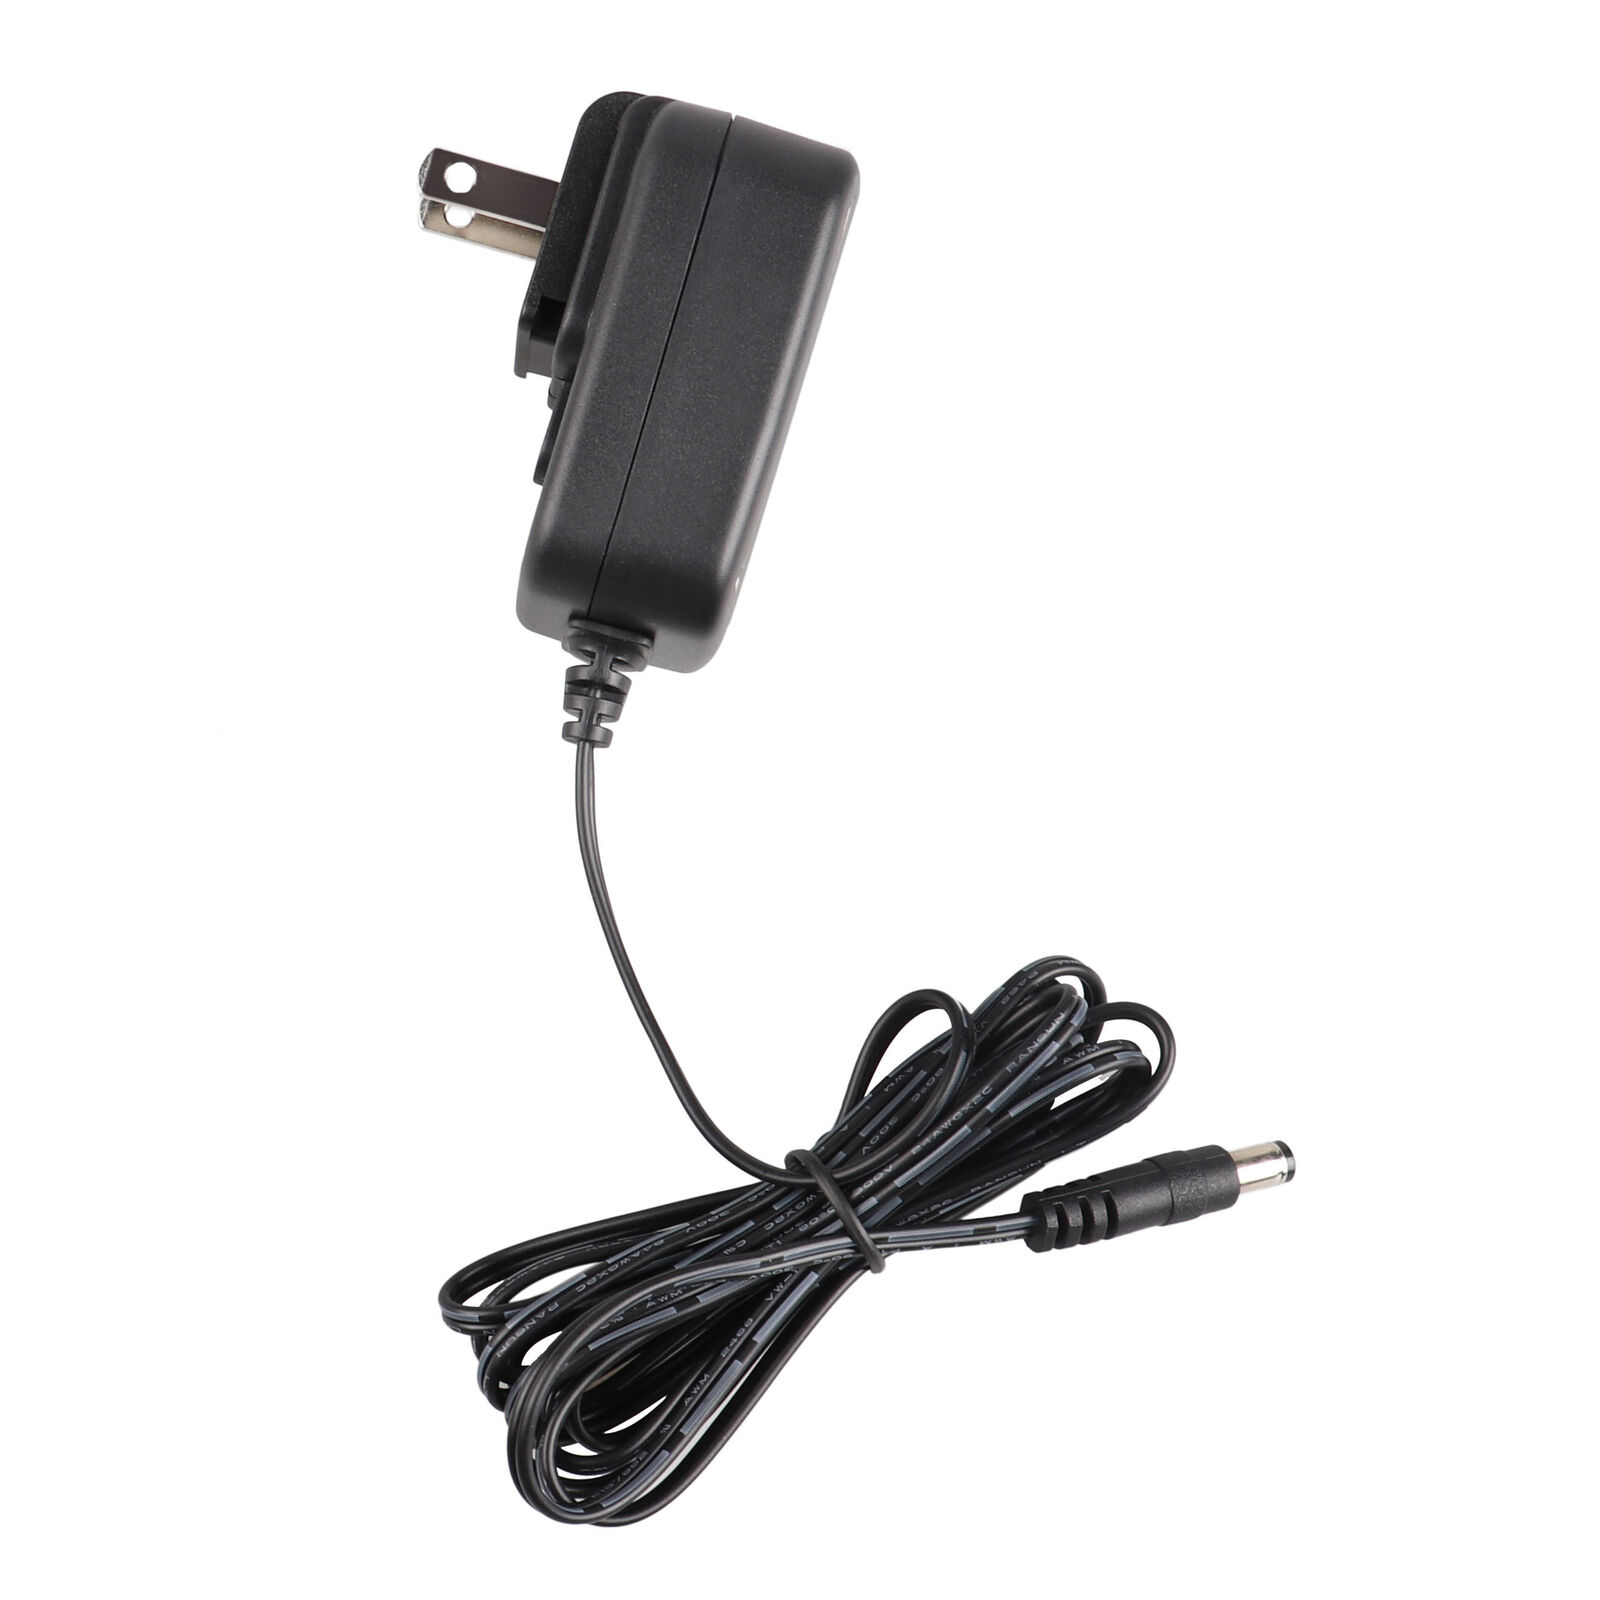 12V AC Adapter For THOR X 10 Million Candle Light Power spotlight C18MIL Charger Colour Black Type AC/DC Adapter Cable